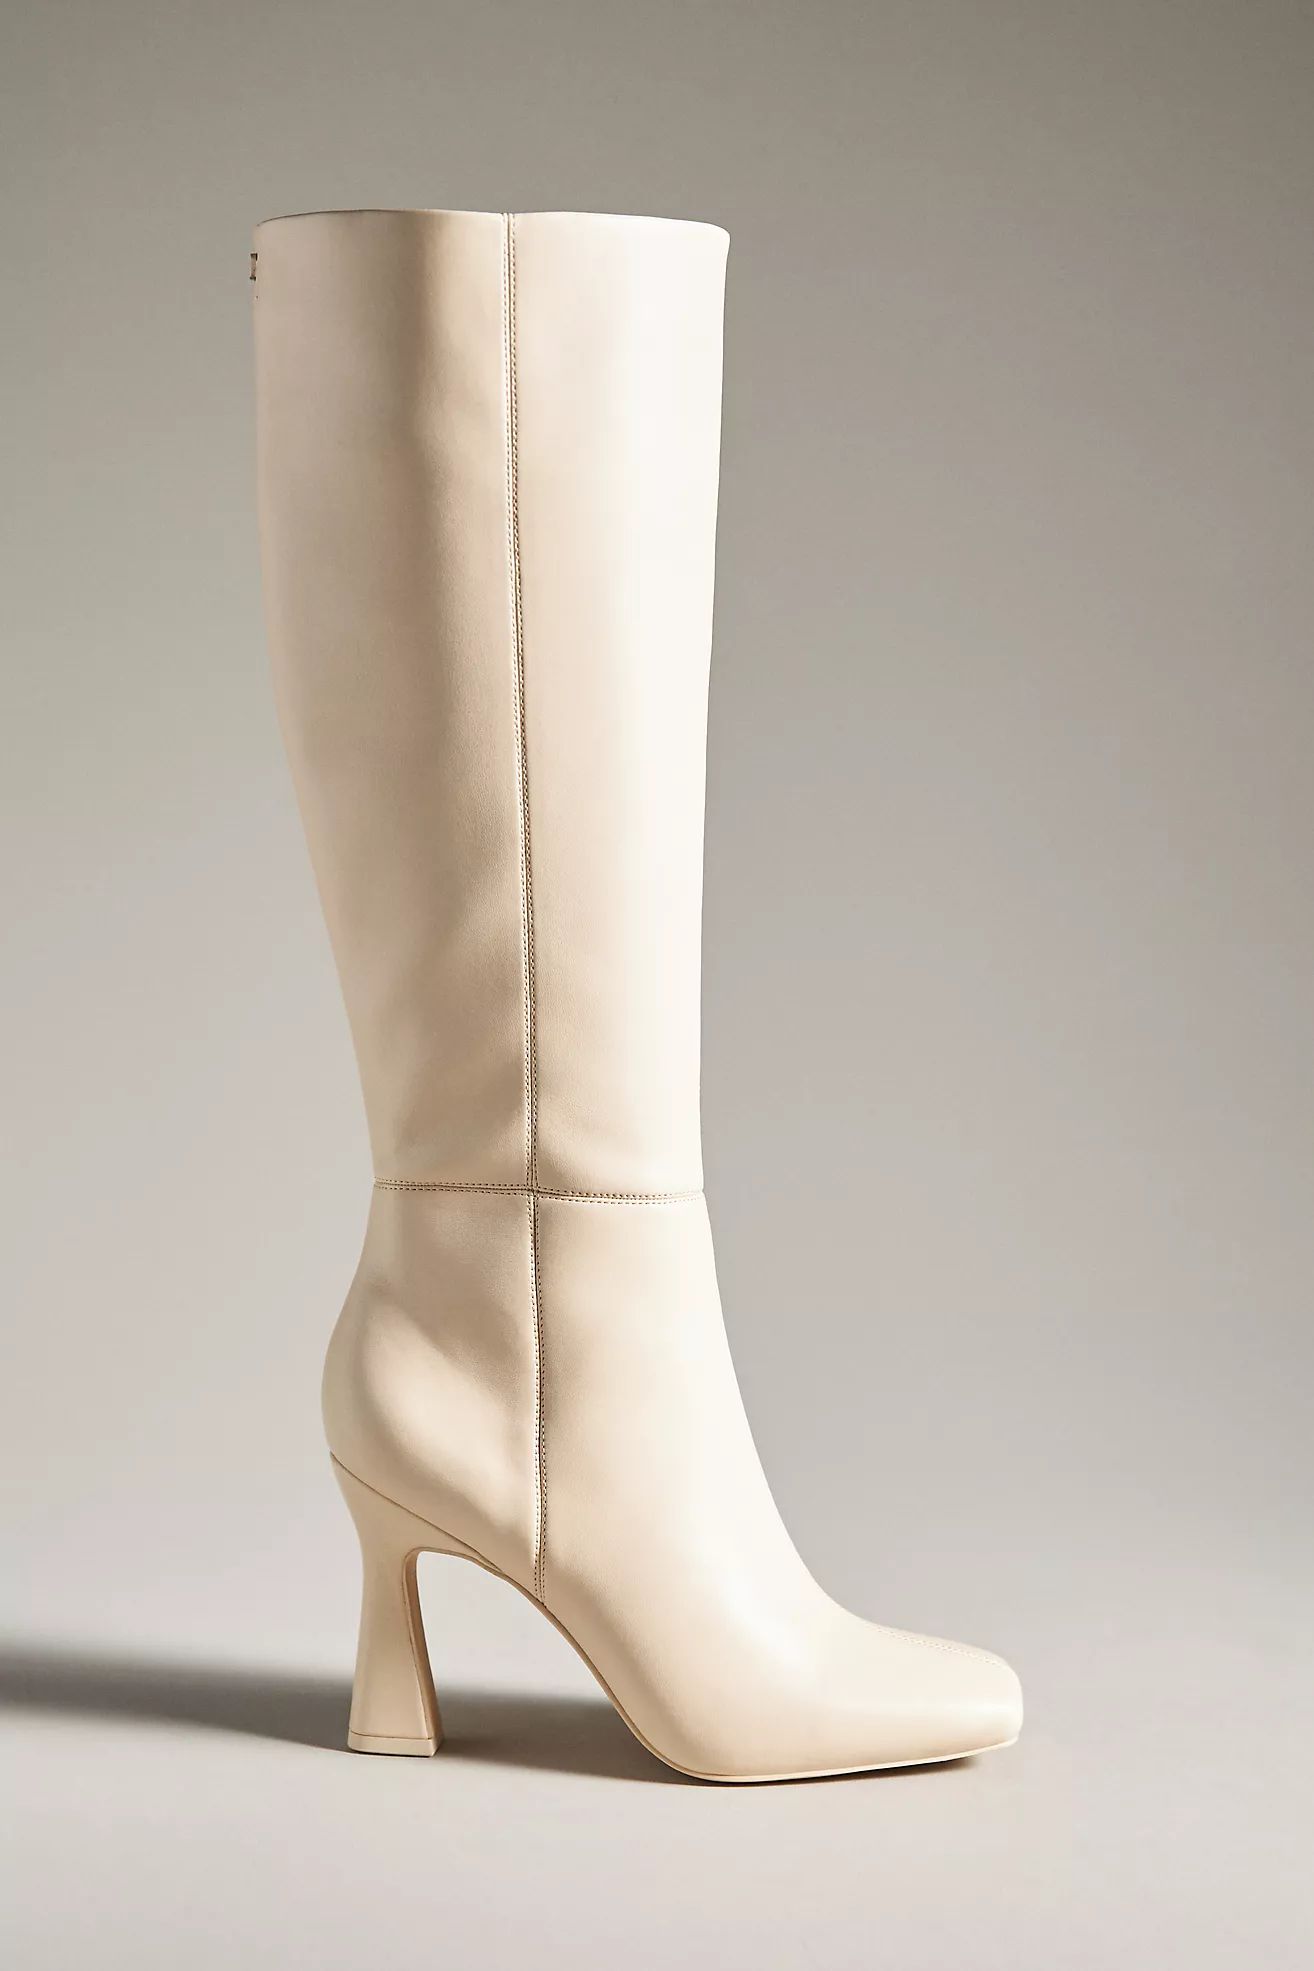 Circus NY Emmy Tall Boots | Anthropologie (US)